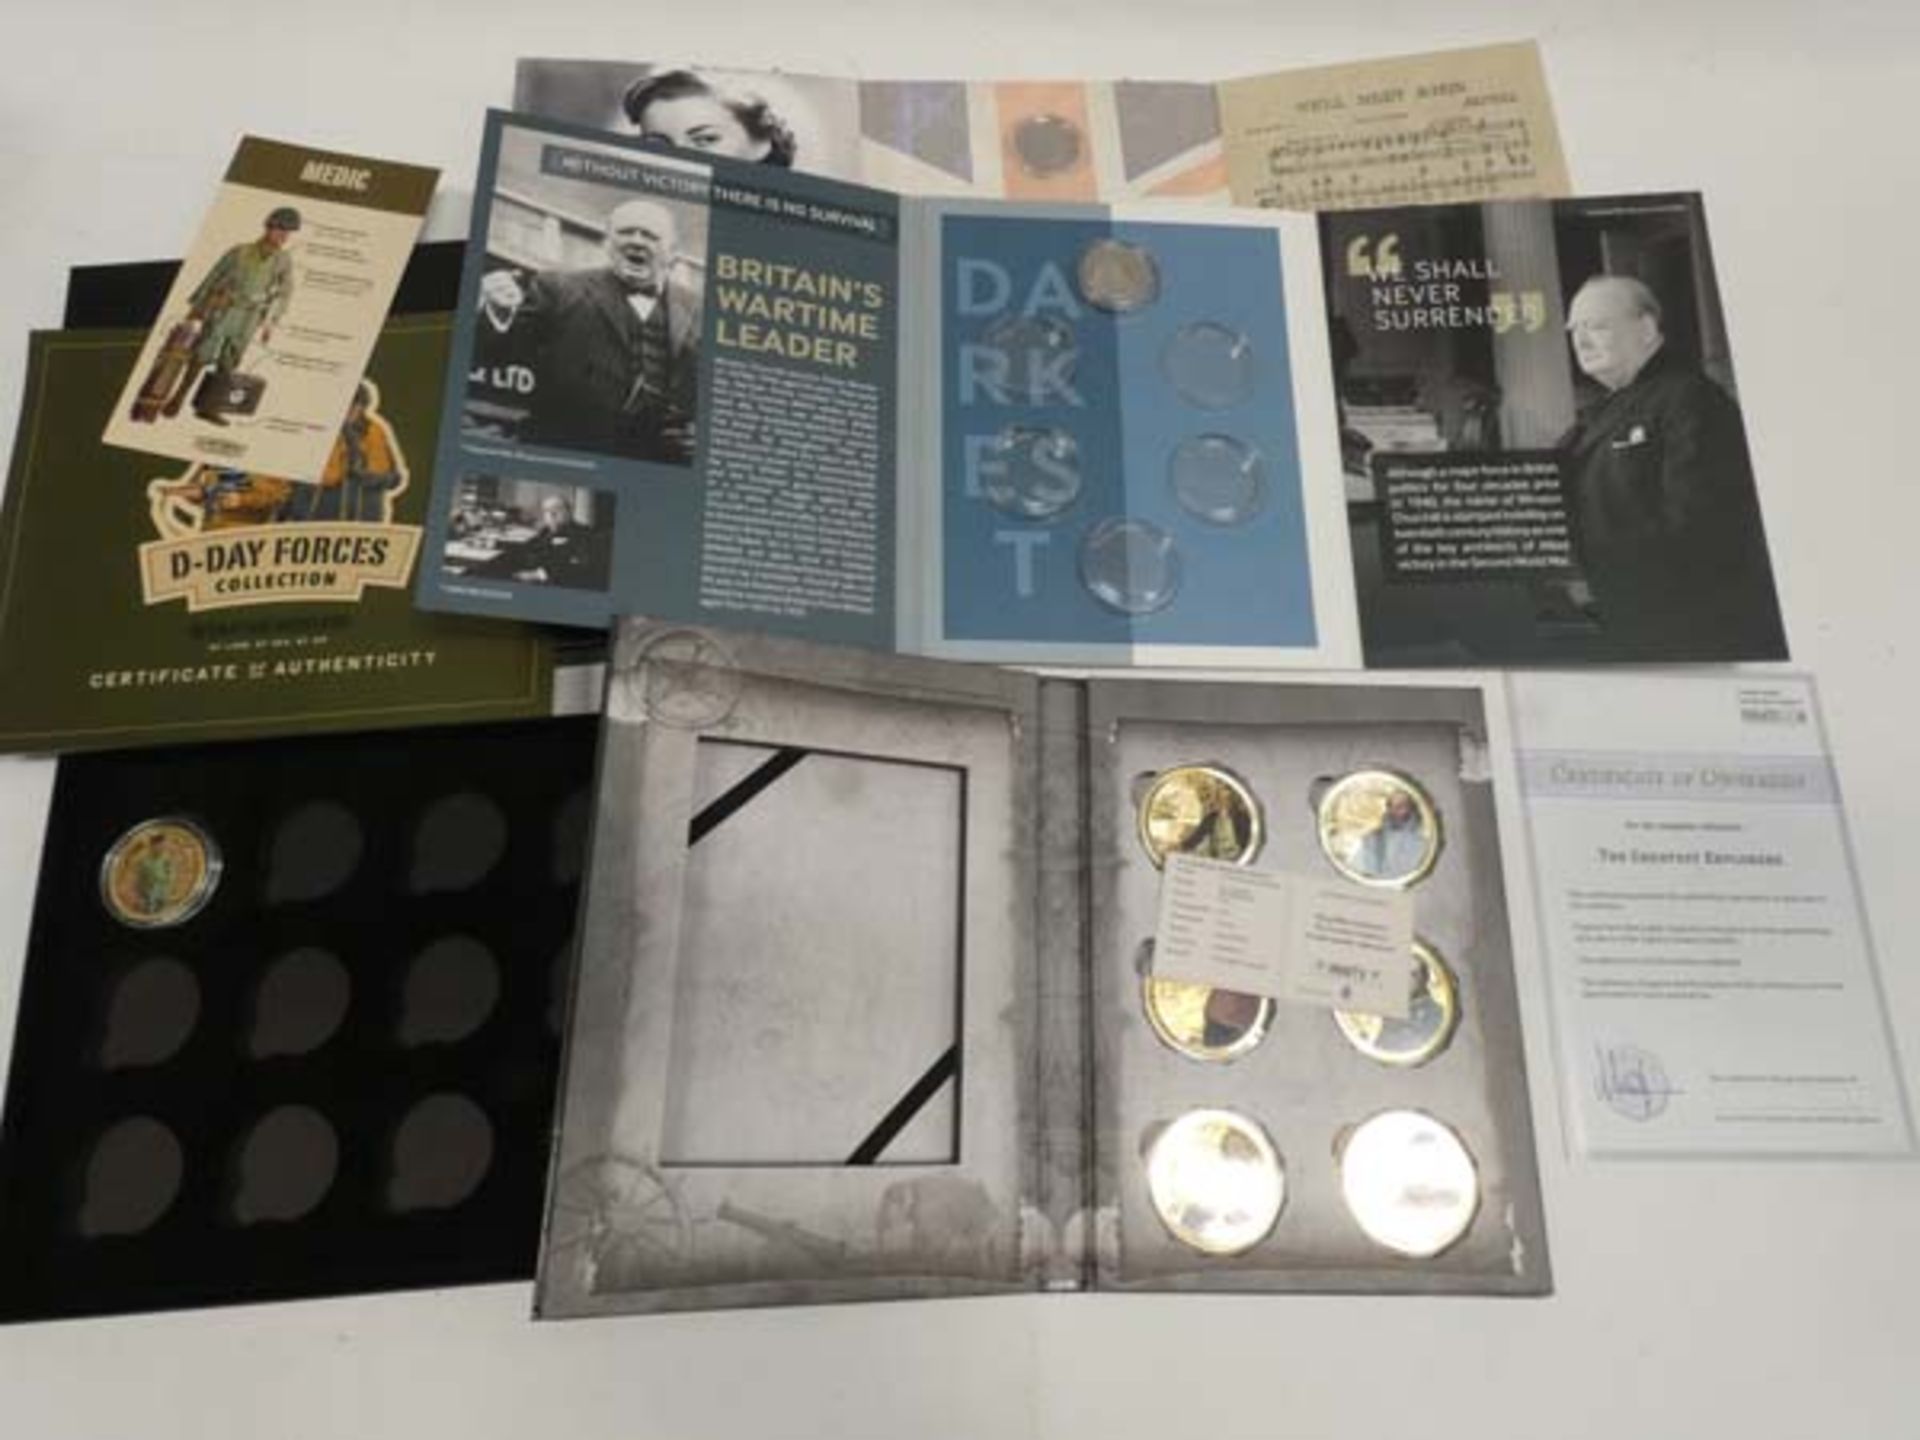 Collectible coin starter sets and The Greatest Exploerers collectible coin set